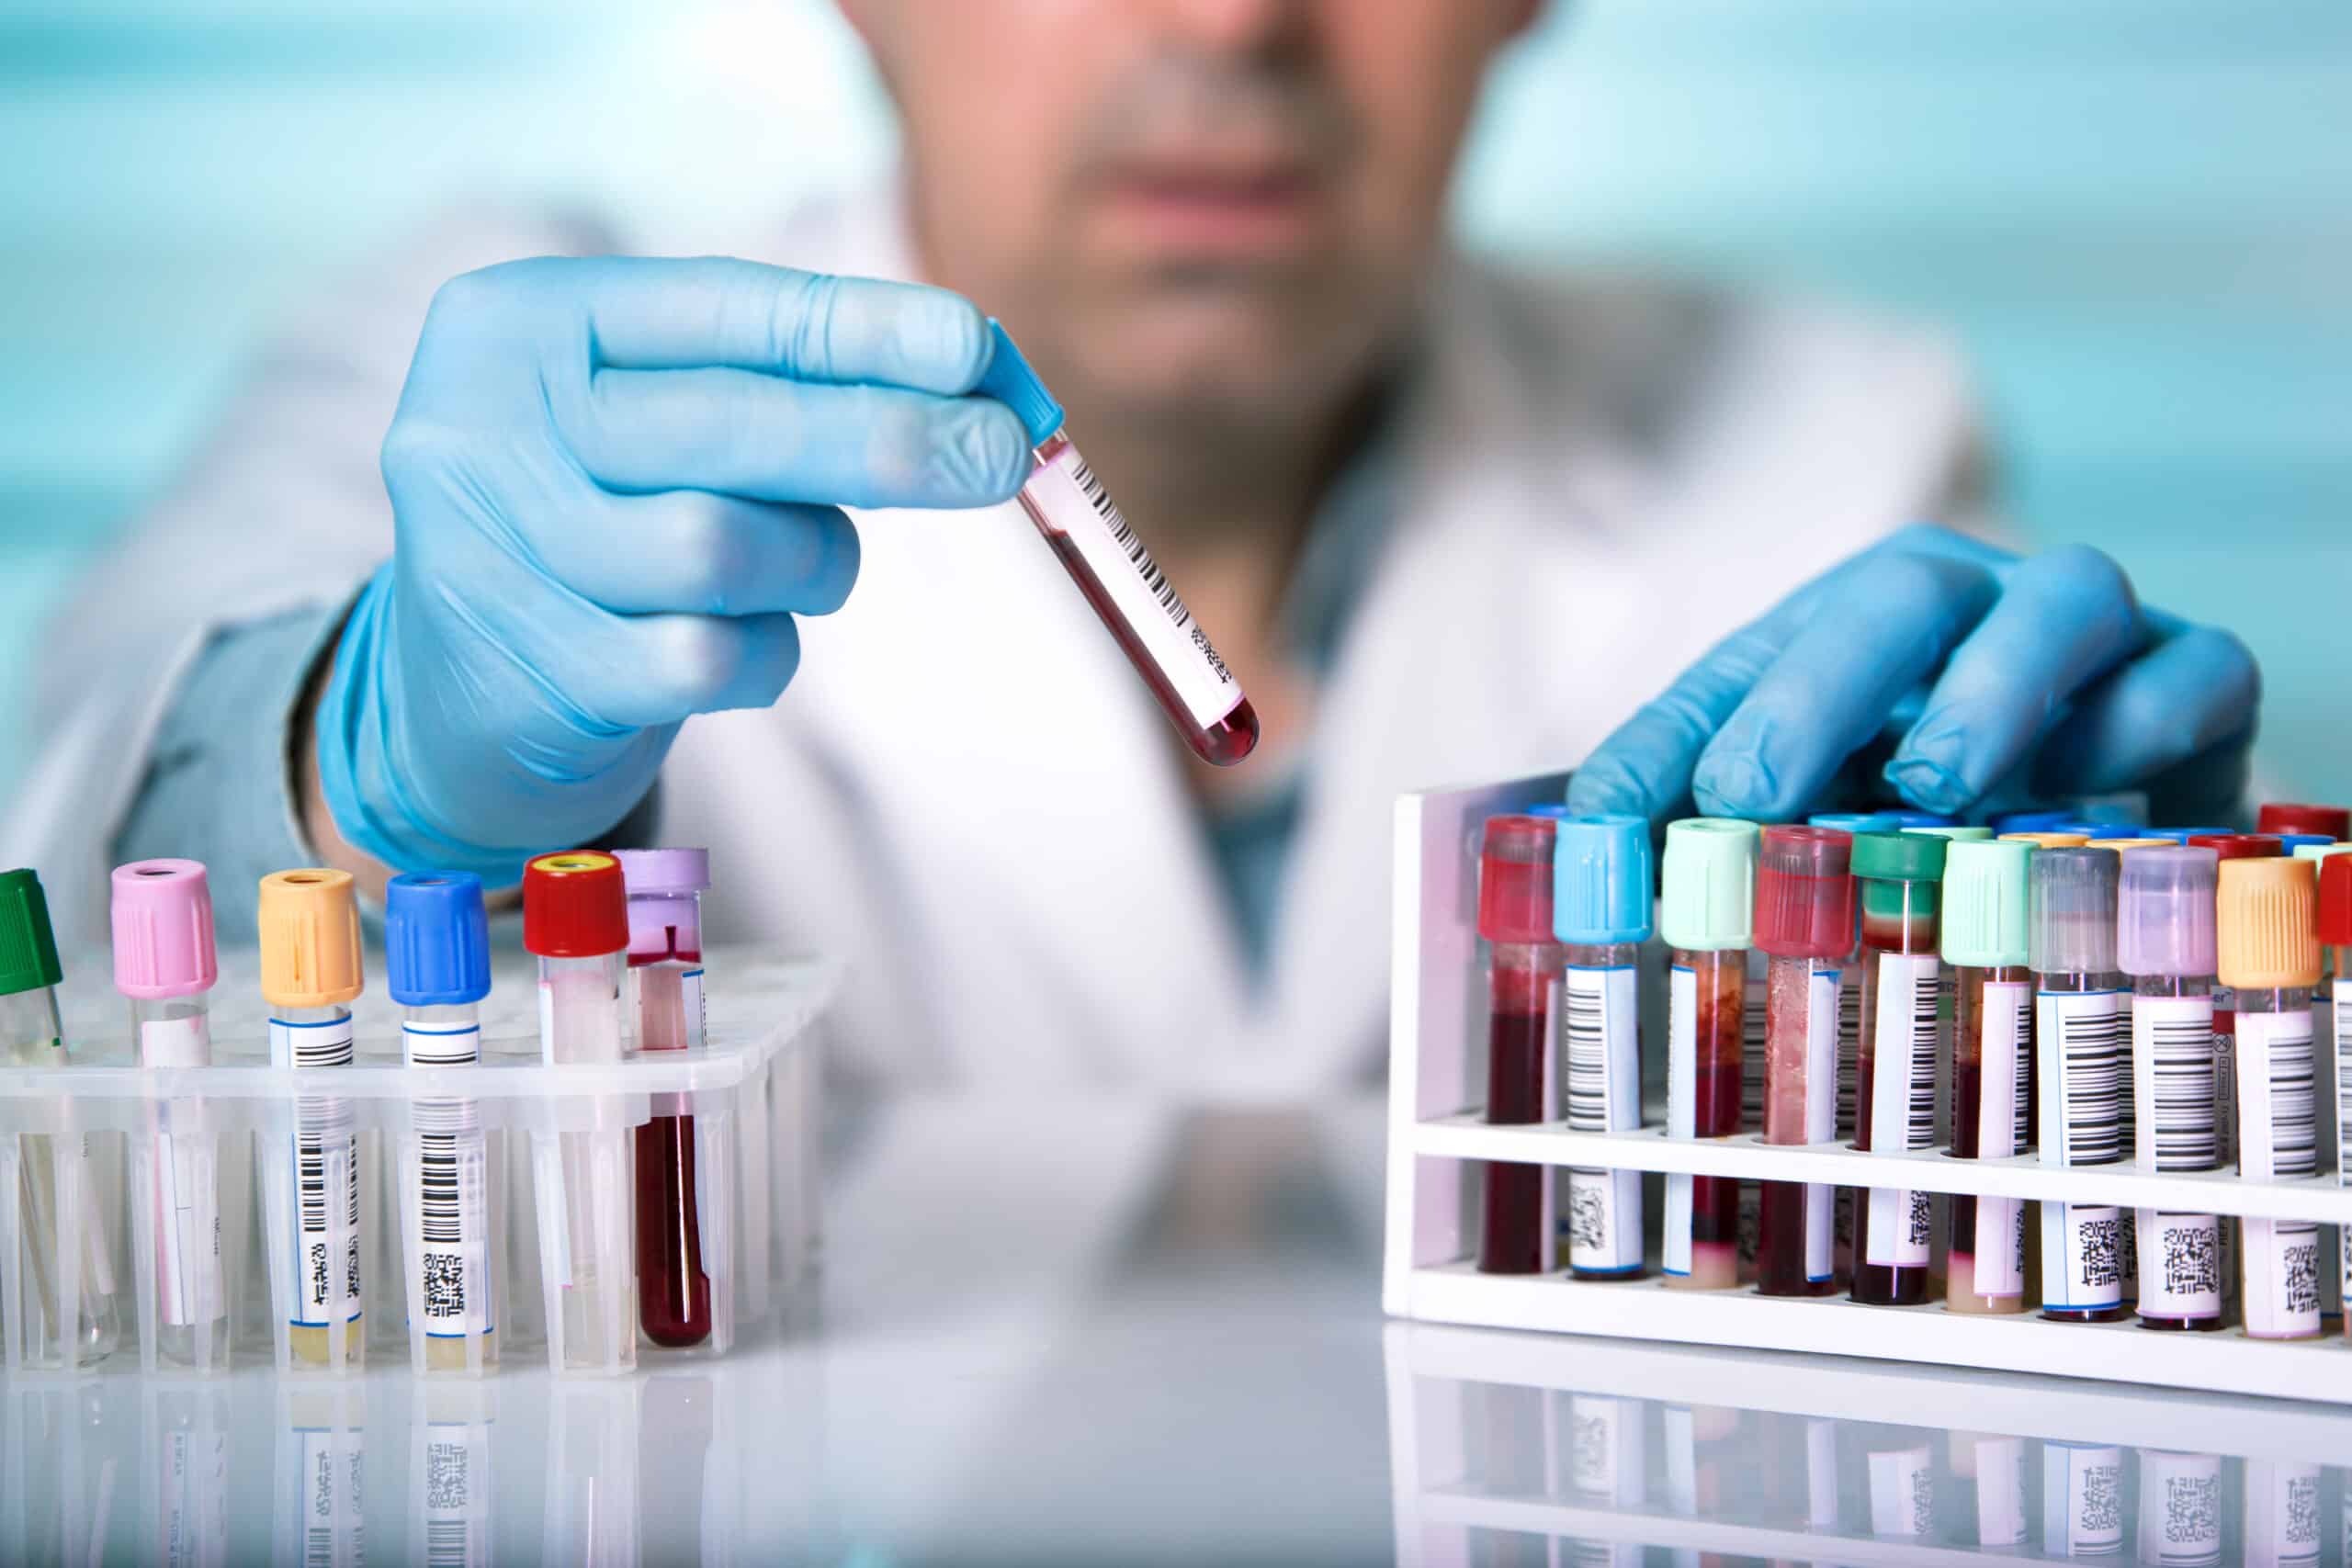 hands of a technician holding blood tube sample in the lab / doctor holds a blood sample tube in his hand testing in the laboratory